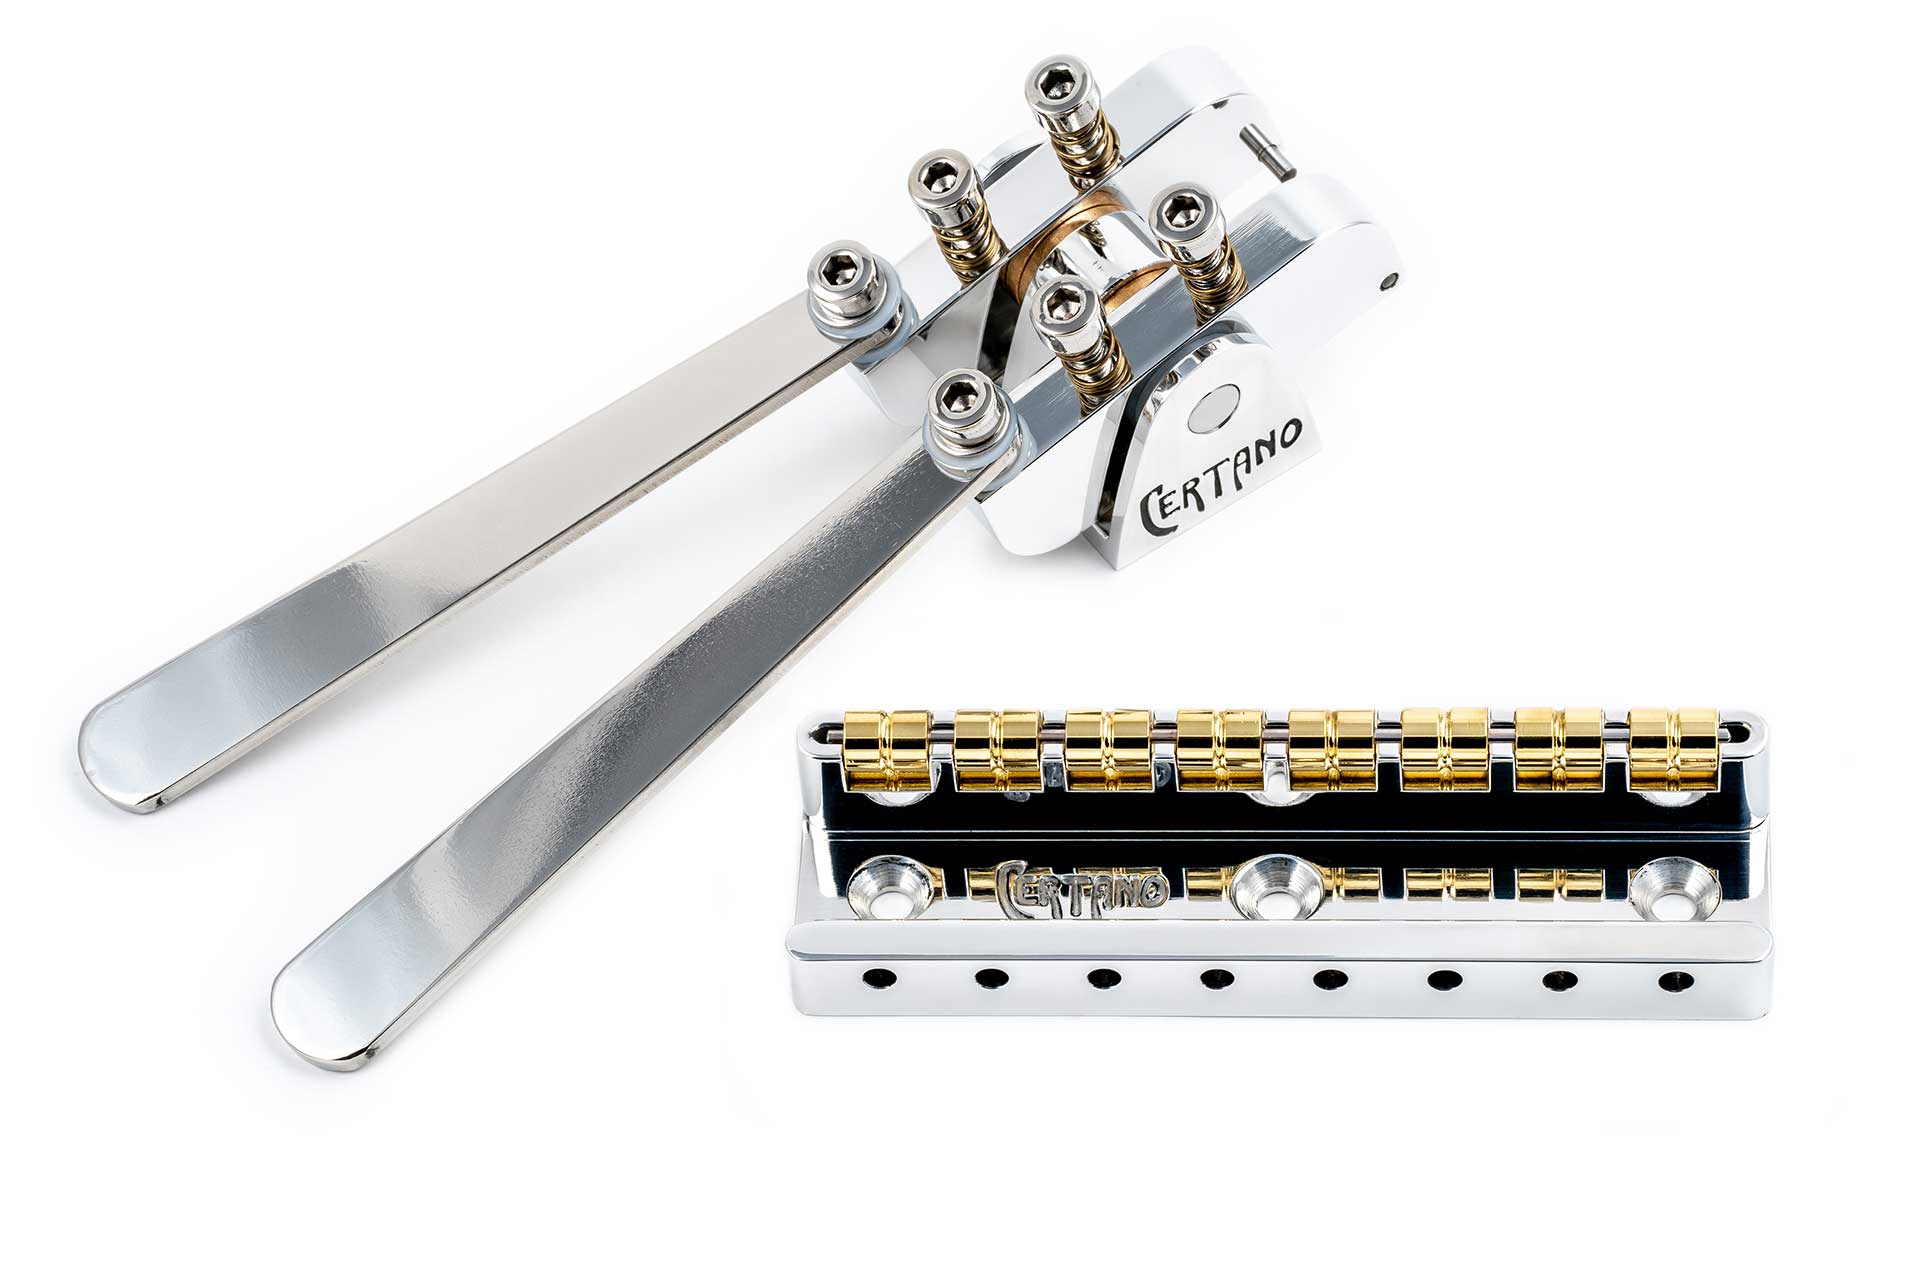 Certano-Combo-Palm-Bender-Bridge-r-r-b-3-with-the-bender-le-carre-Regular-for-lap-steel-white-background